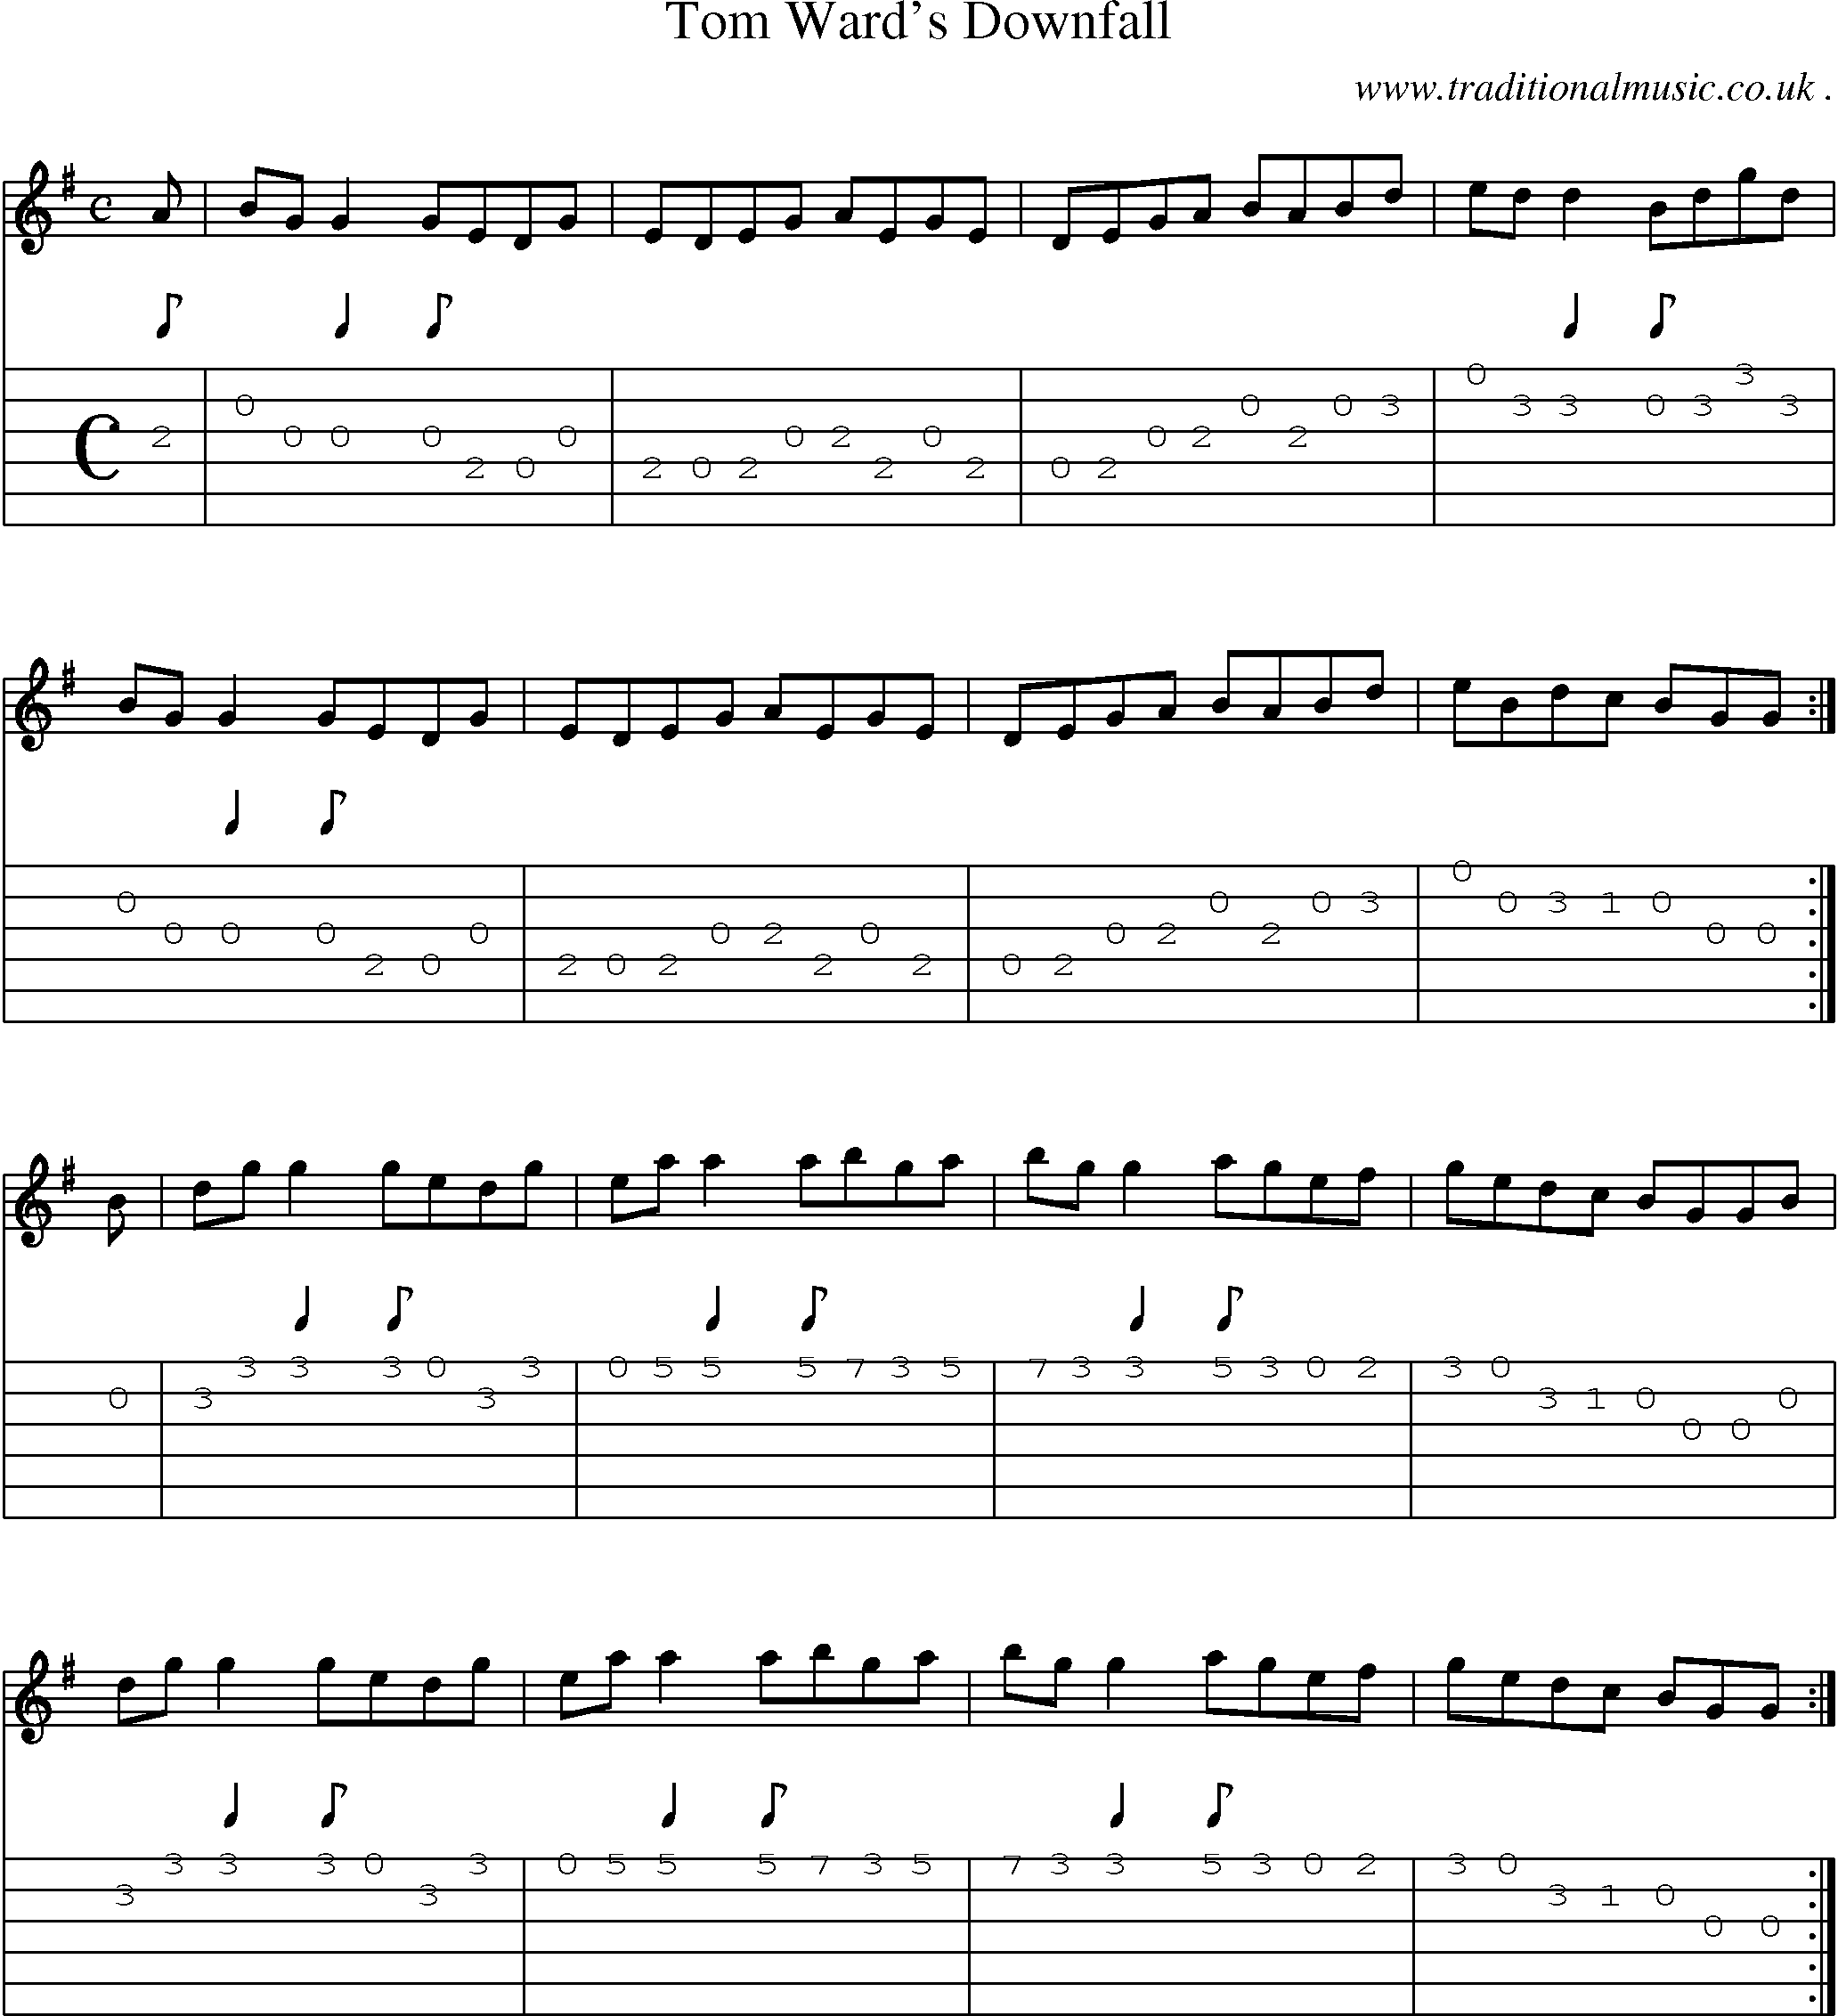 Sheet-Music and Guitar Tabs for Tom Wards Downfall